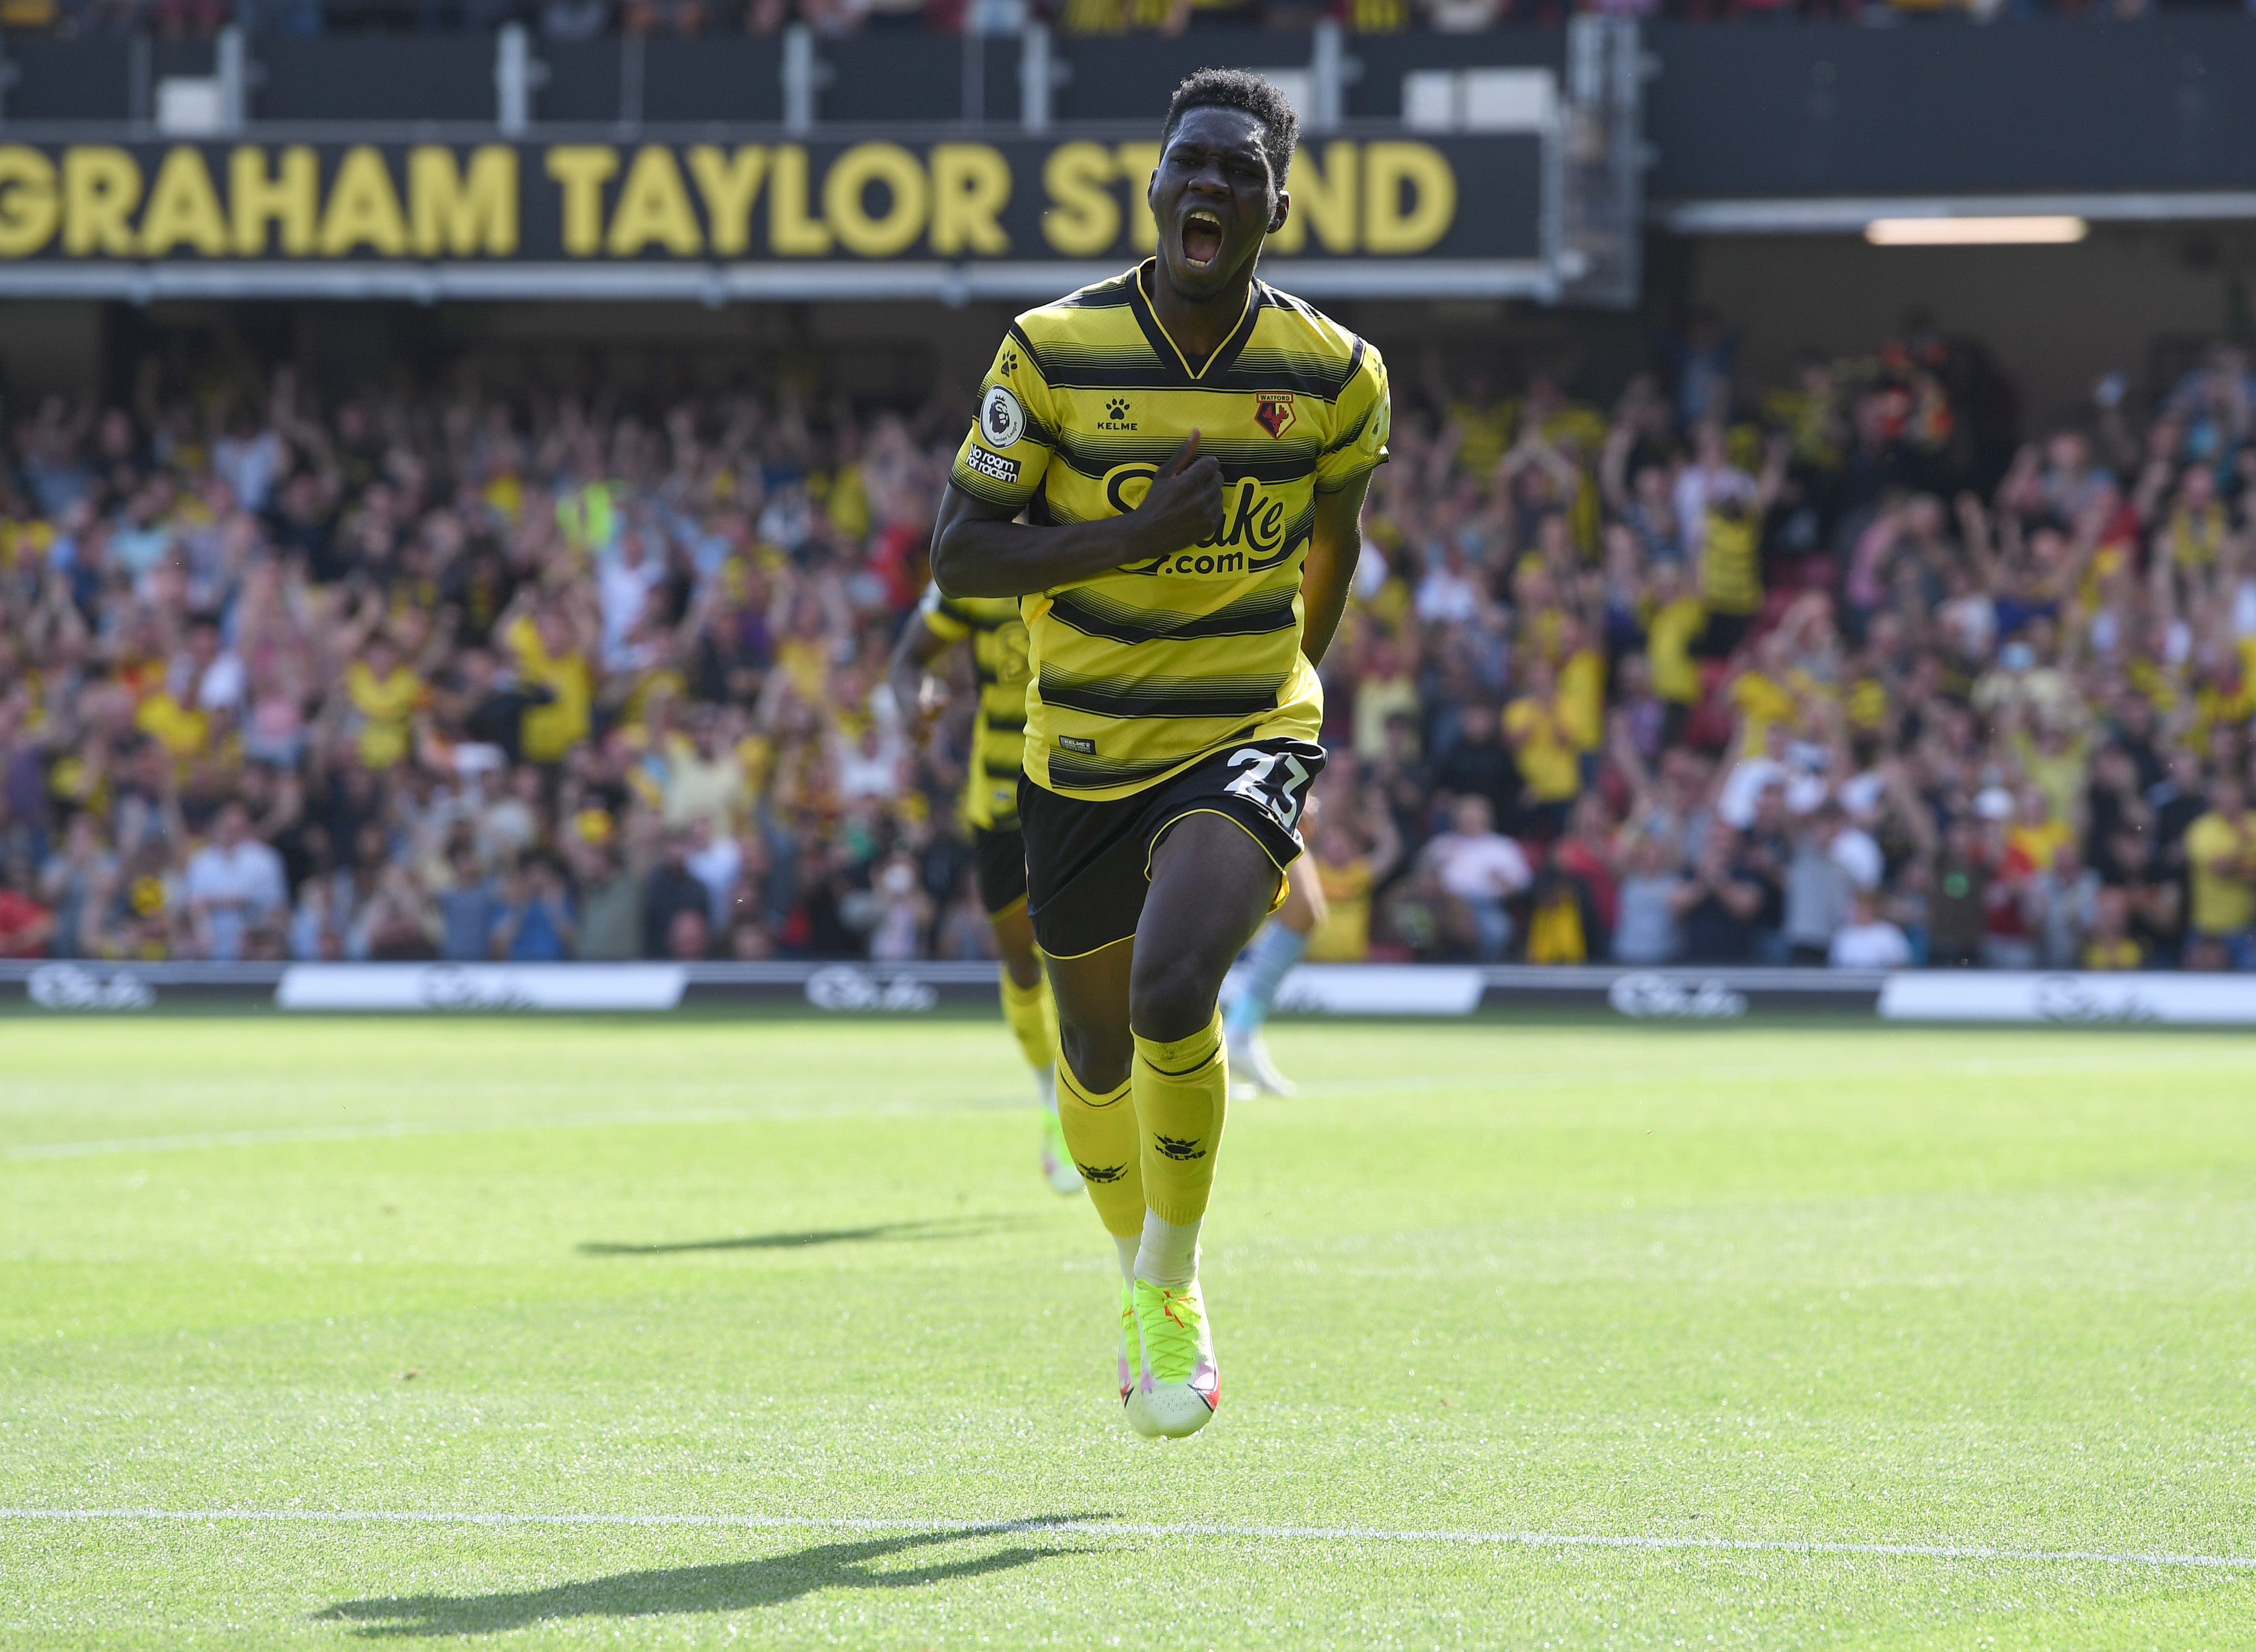 Watford’s Ismaila Sarr scored on the opening weekend of the Premier League last weekend